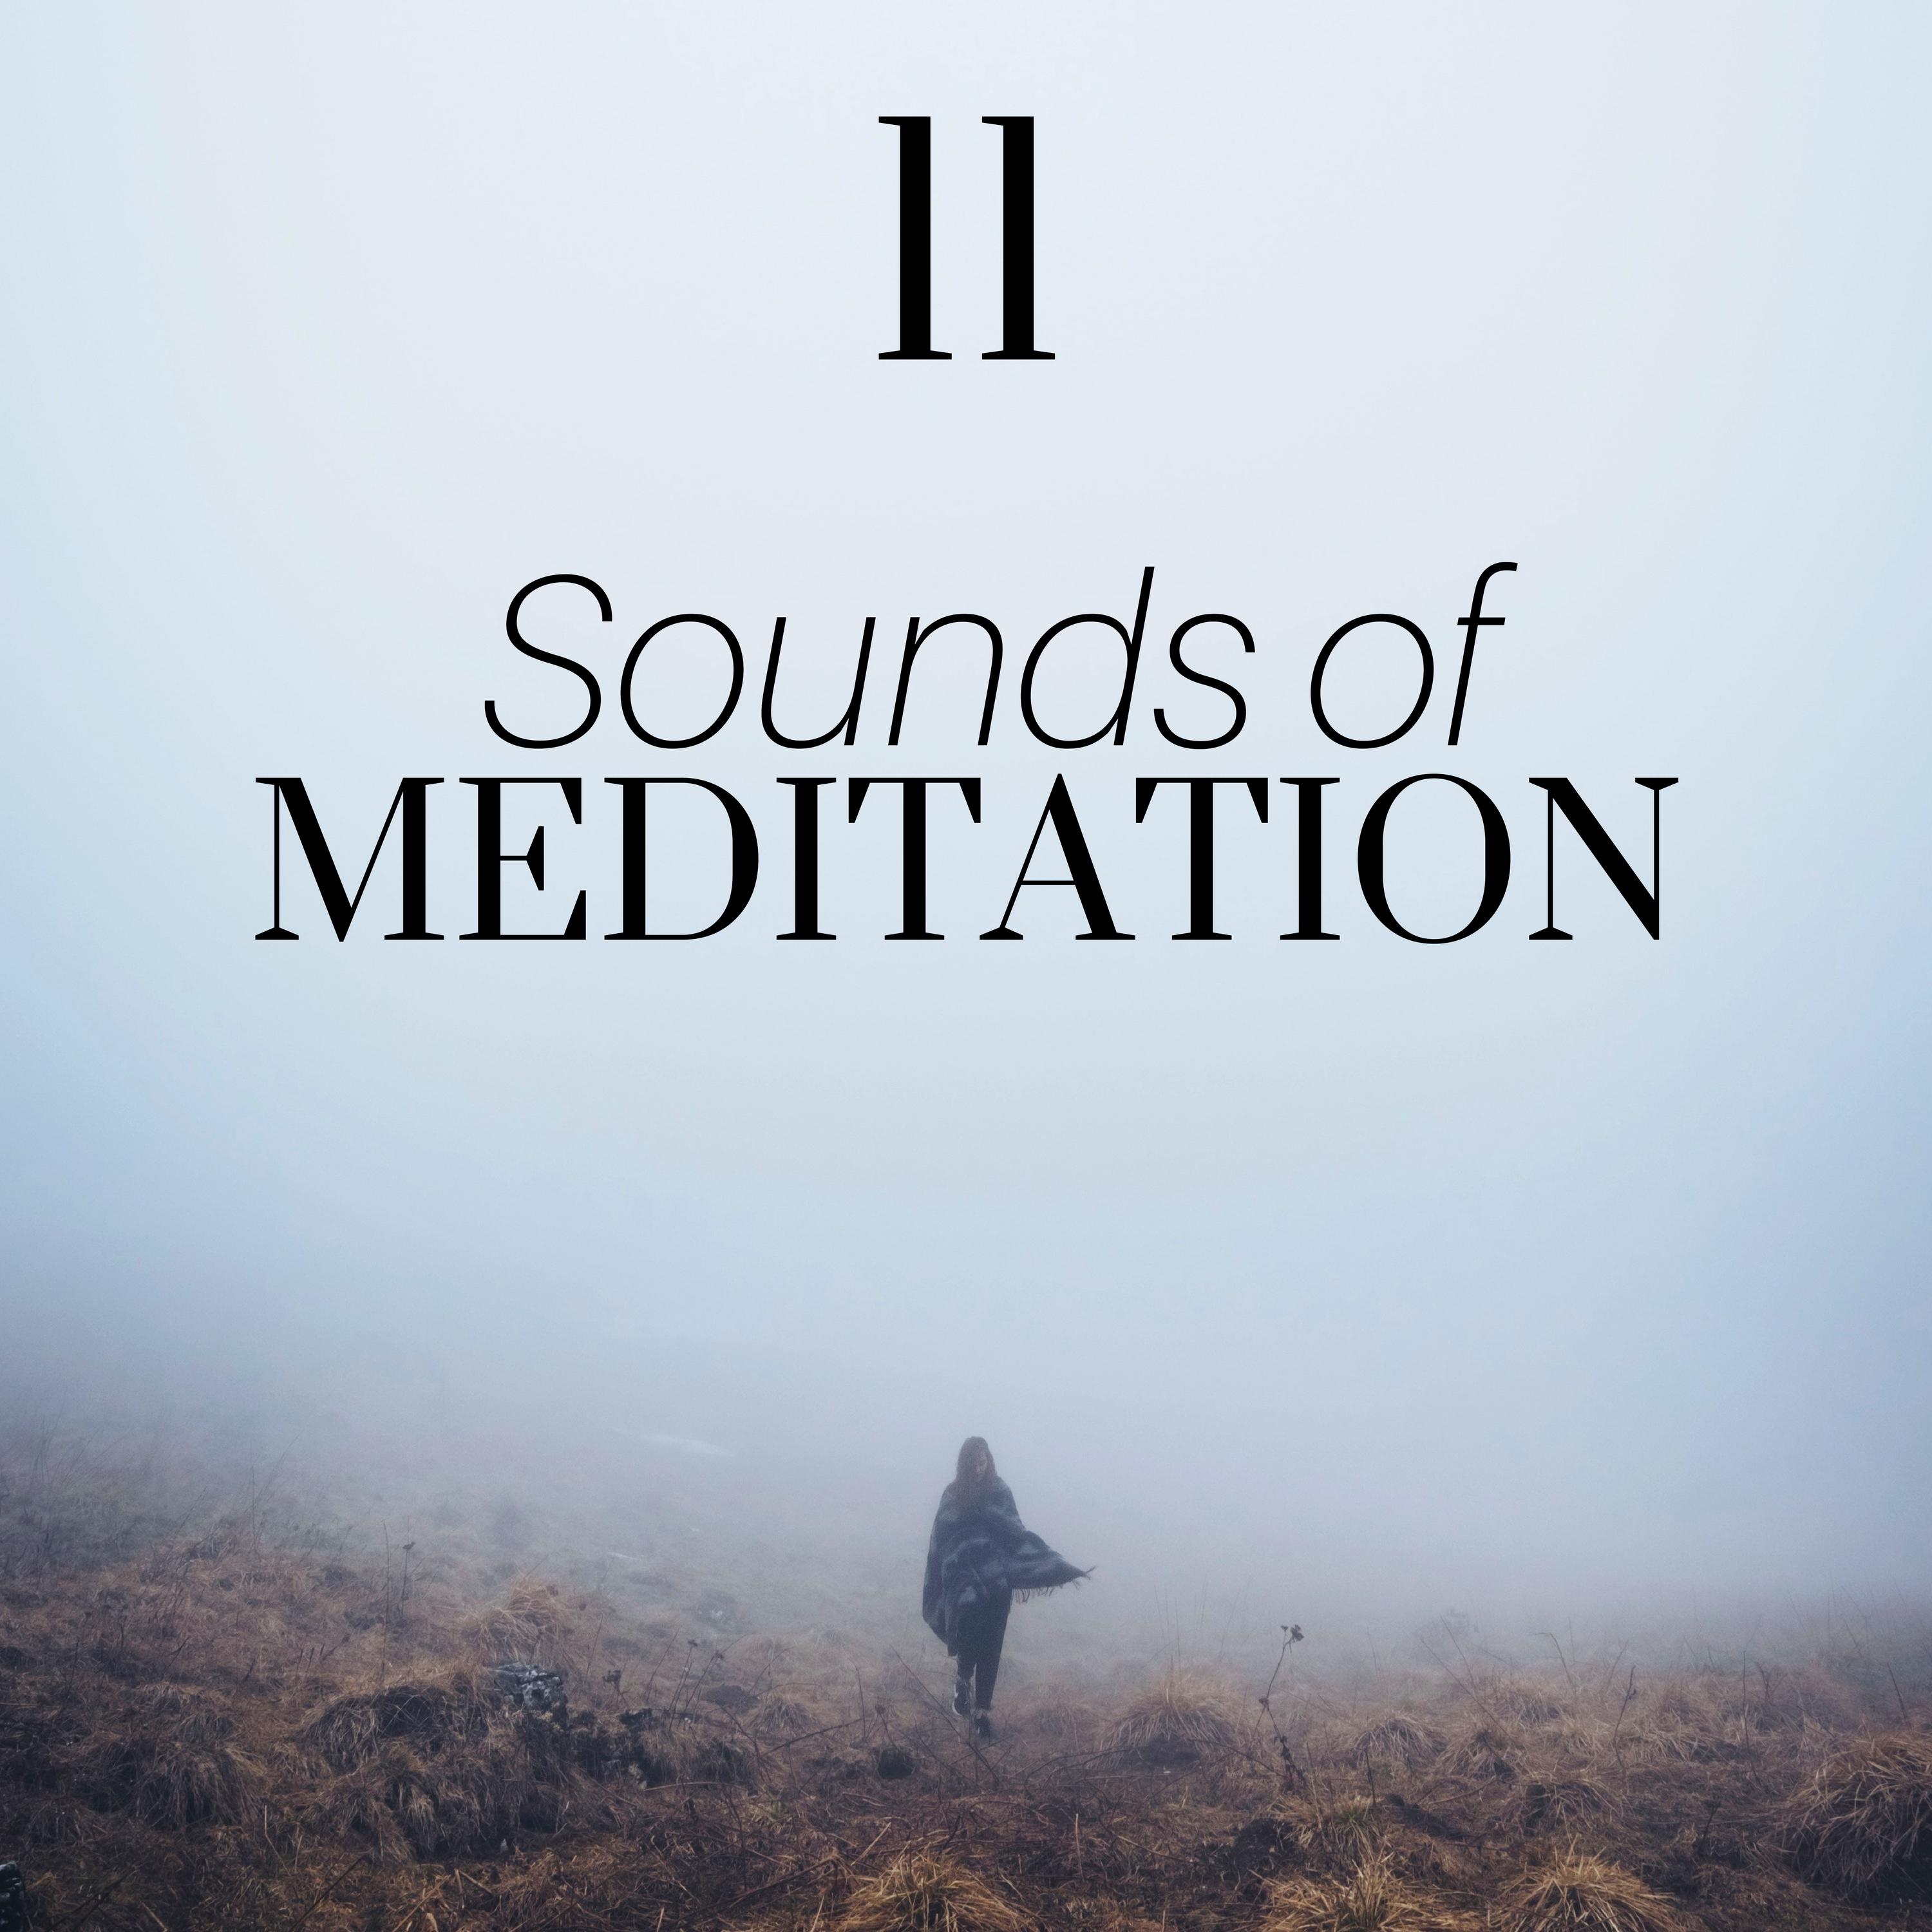 11 Sounds of Meditation: Mindfulness Exercises, Yoga Workout, Anxiety Free, Natural Sleep Aid